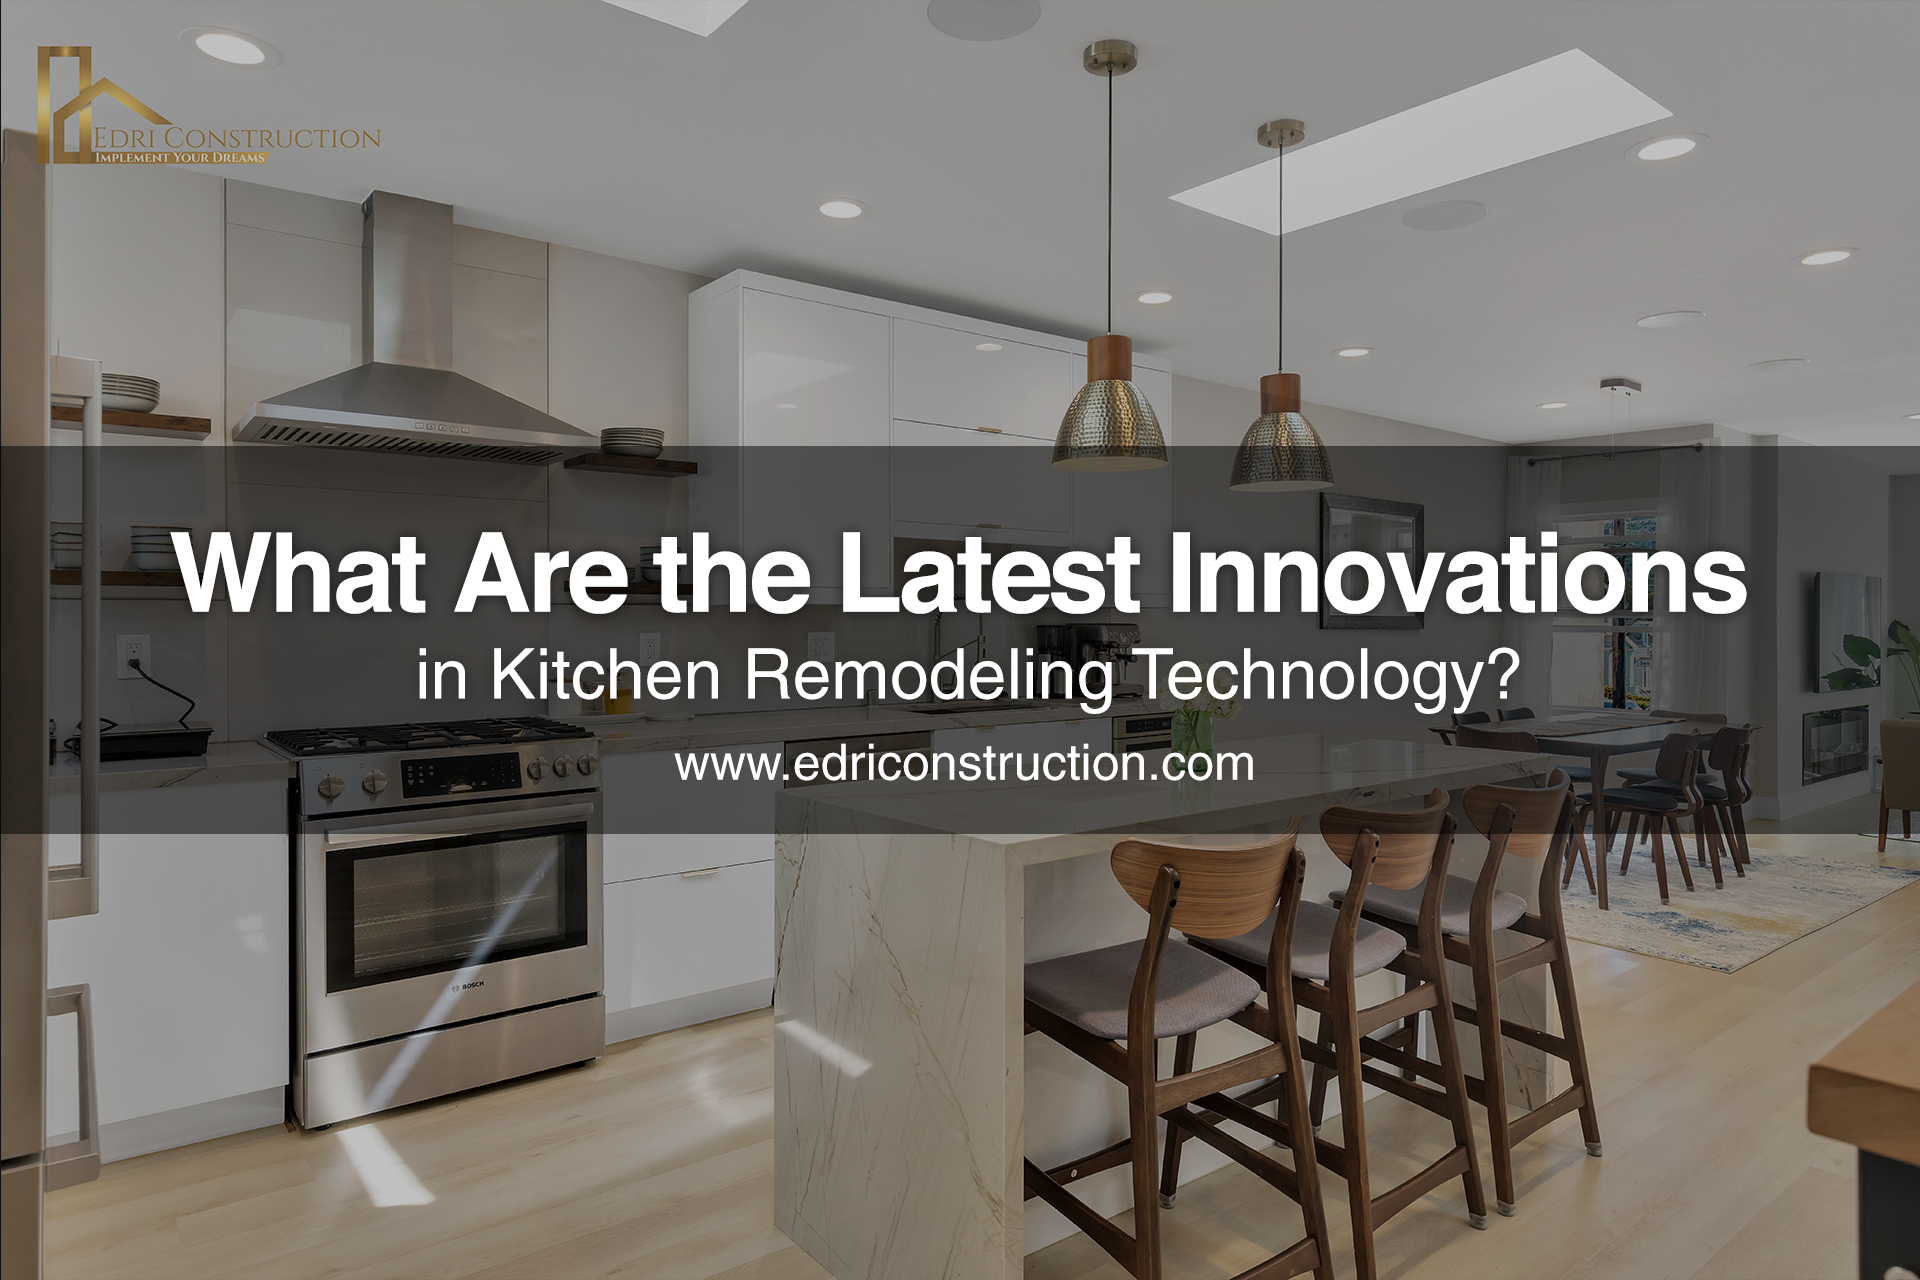  Latest Innovations in Kitchen Remodeling